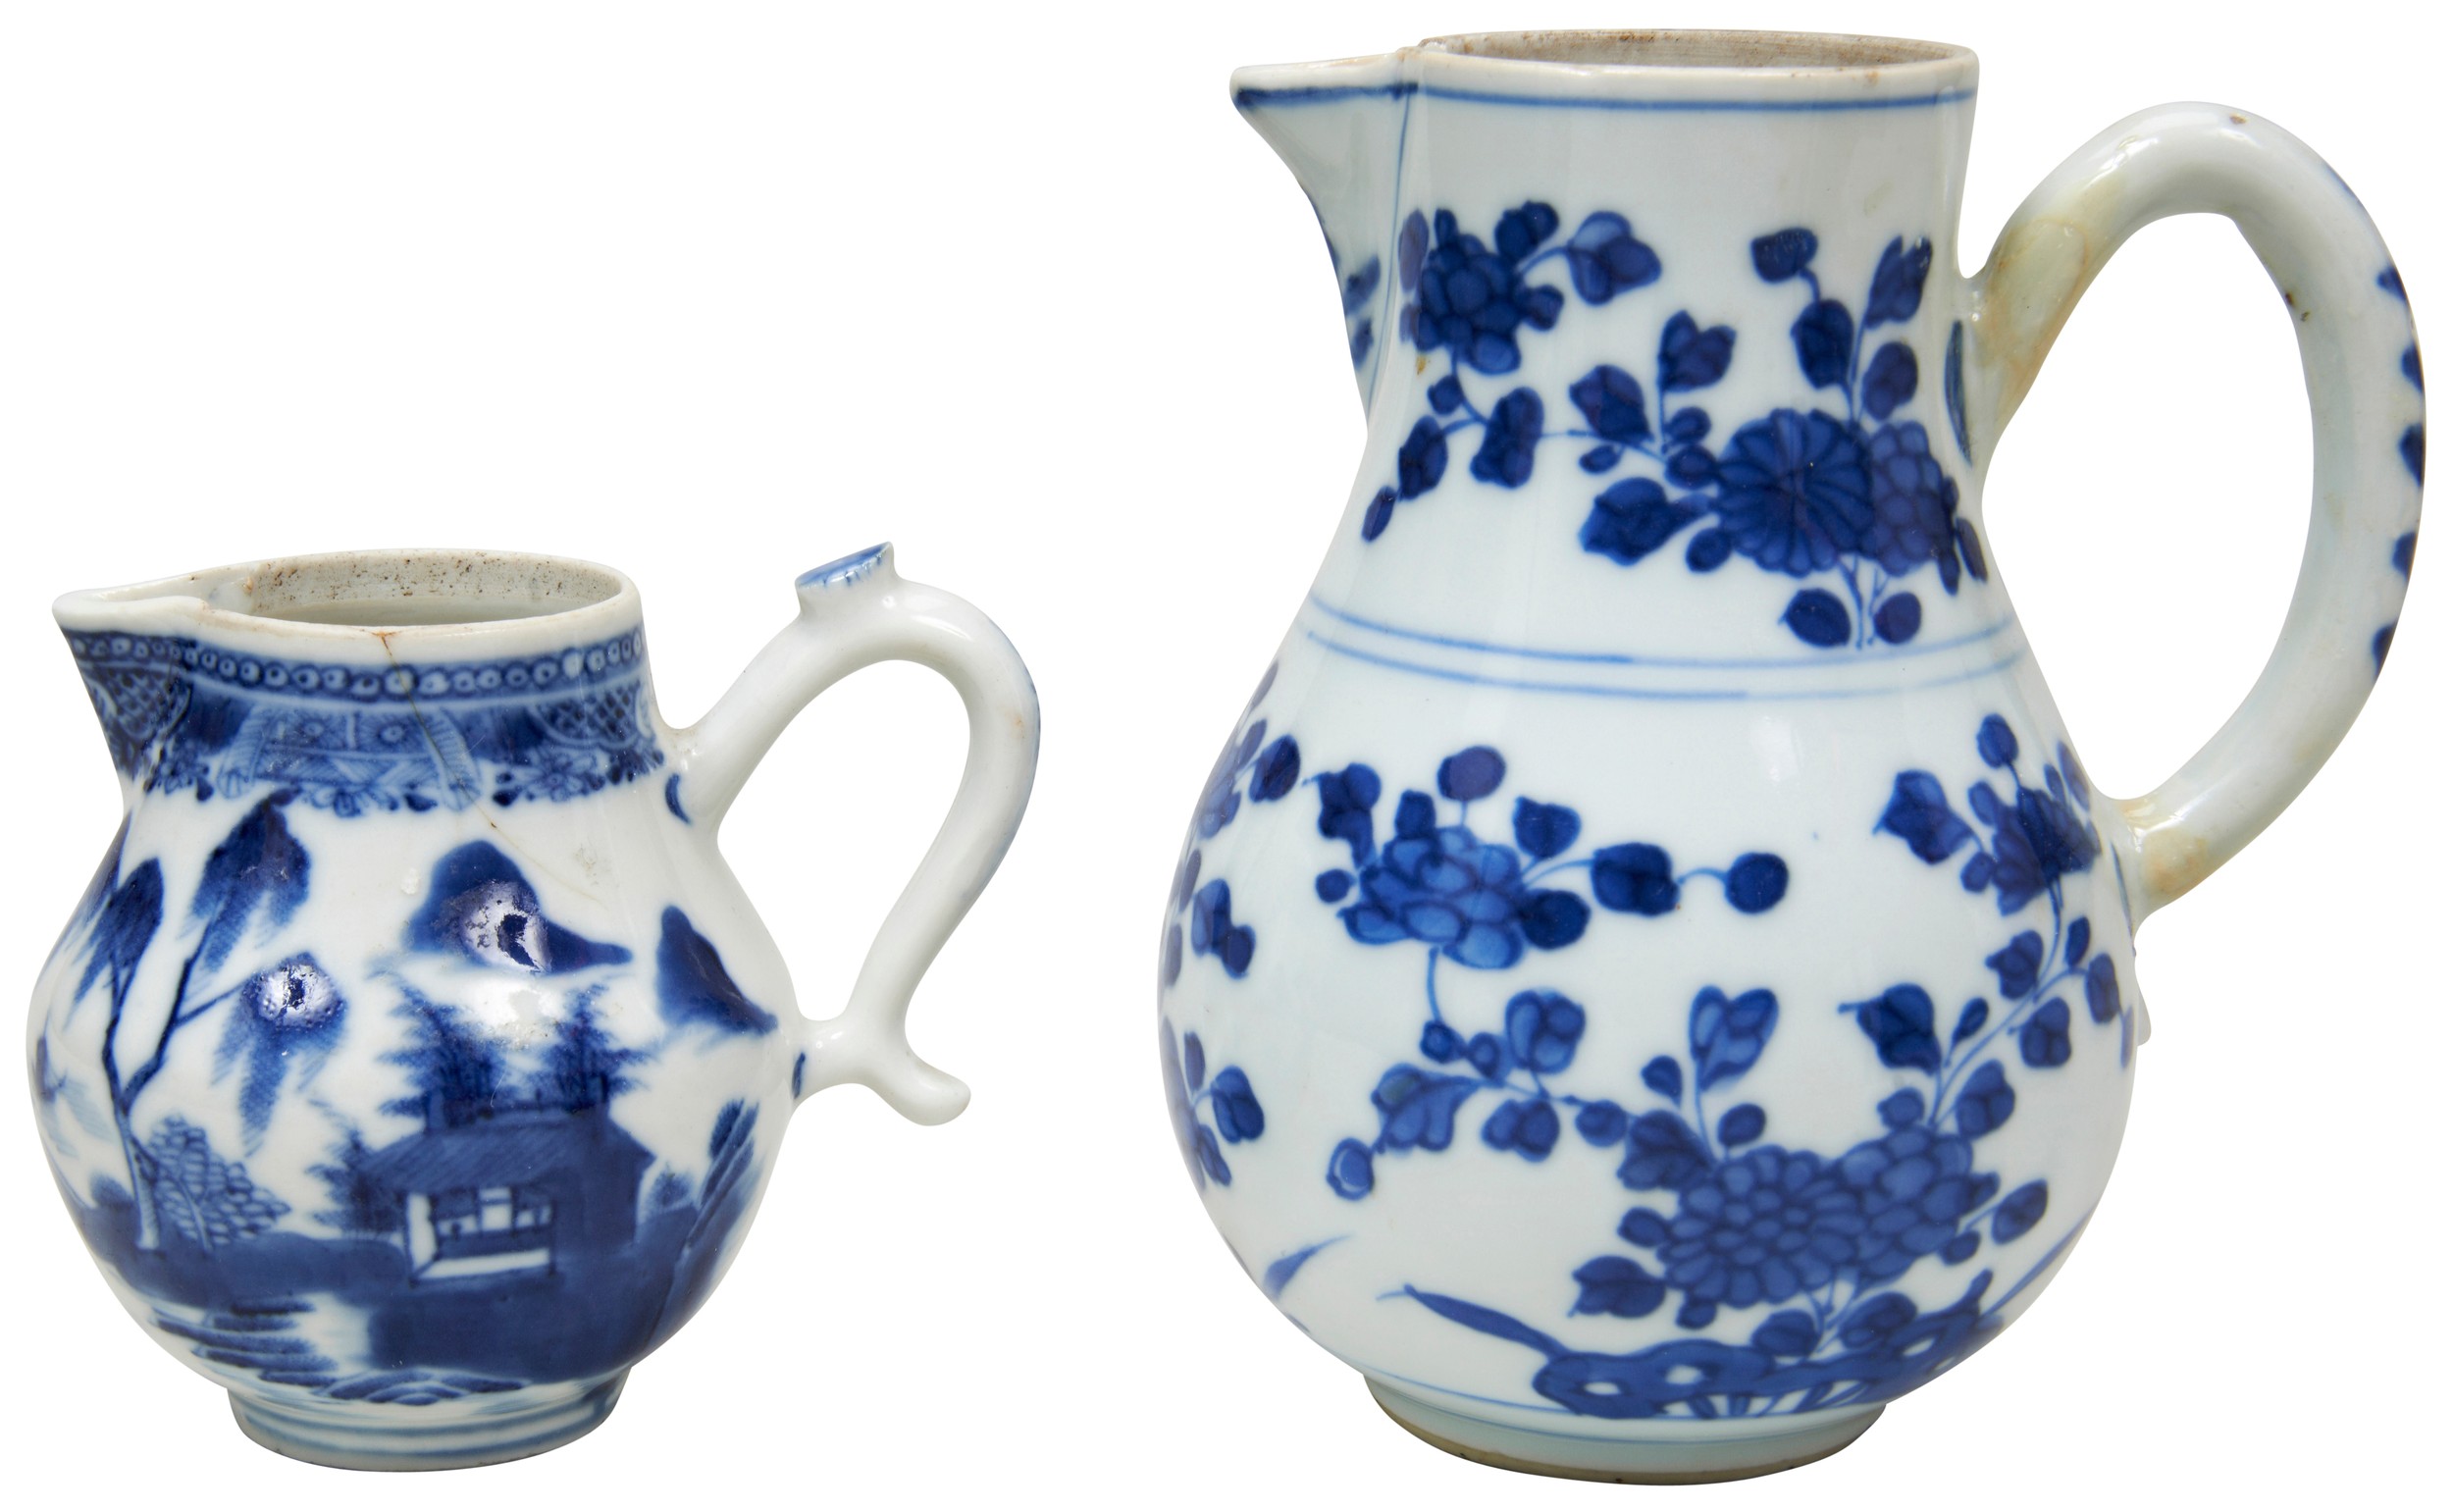 SMALL CHINESE EXPORT BLUE AND WHITE CREAM JUG QIANLONG PERIOD (1736-1795) painted with a